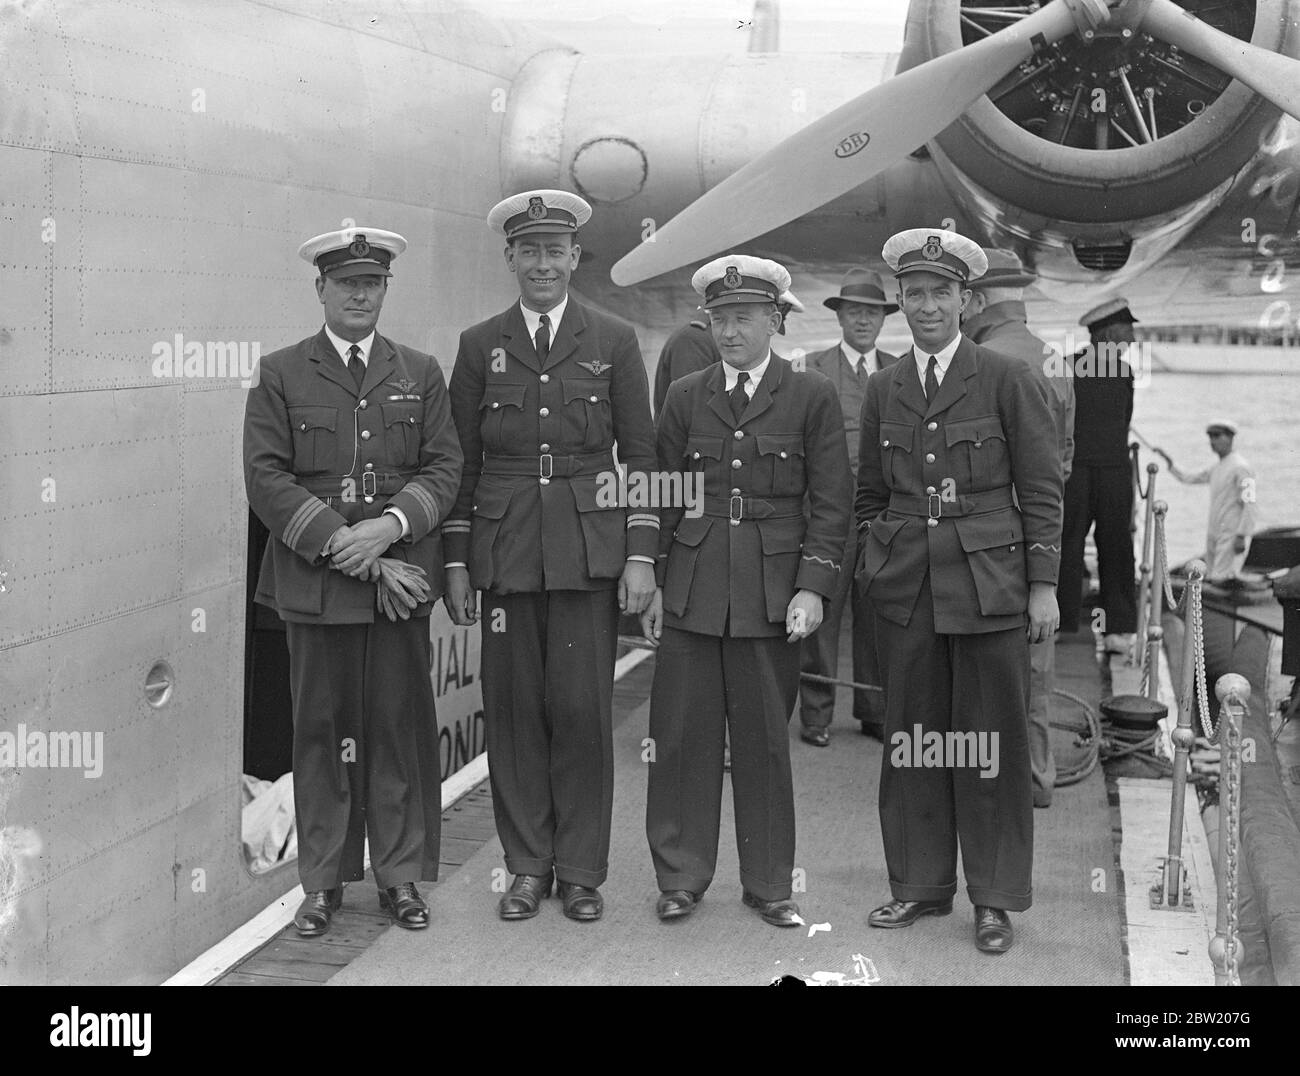 The Imperial Airways flying boat Caledonia arrived back at Southampton from the Foynes airbase, Ireland, after completing her first experimental doublecrossing of the Atlantic. The return ocean crossing was accomplished in 12 hours 7 minutes. The crew members - left to right: Captain A. S. Wilcockson, First Officer Bowes, and radio operators Hobbs and Tommy Valetts.] 17 July 1937 Stock Photo